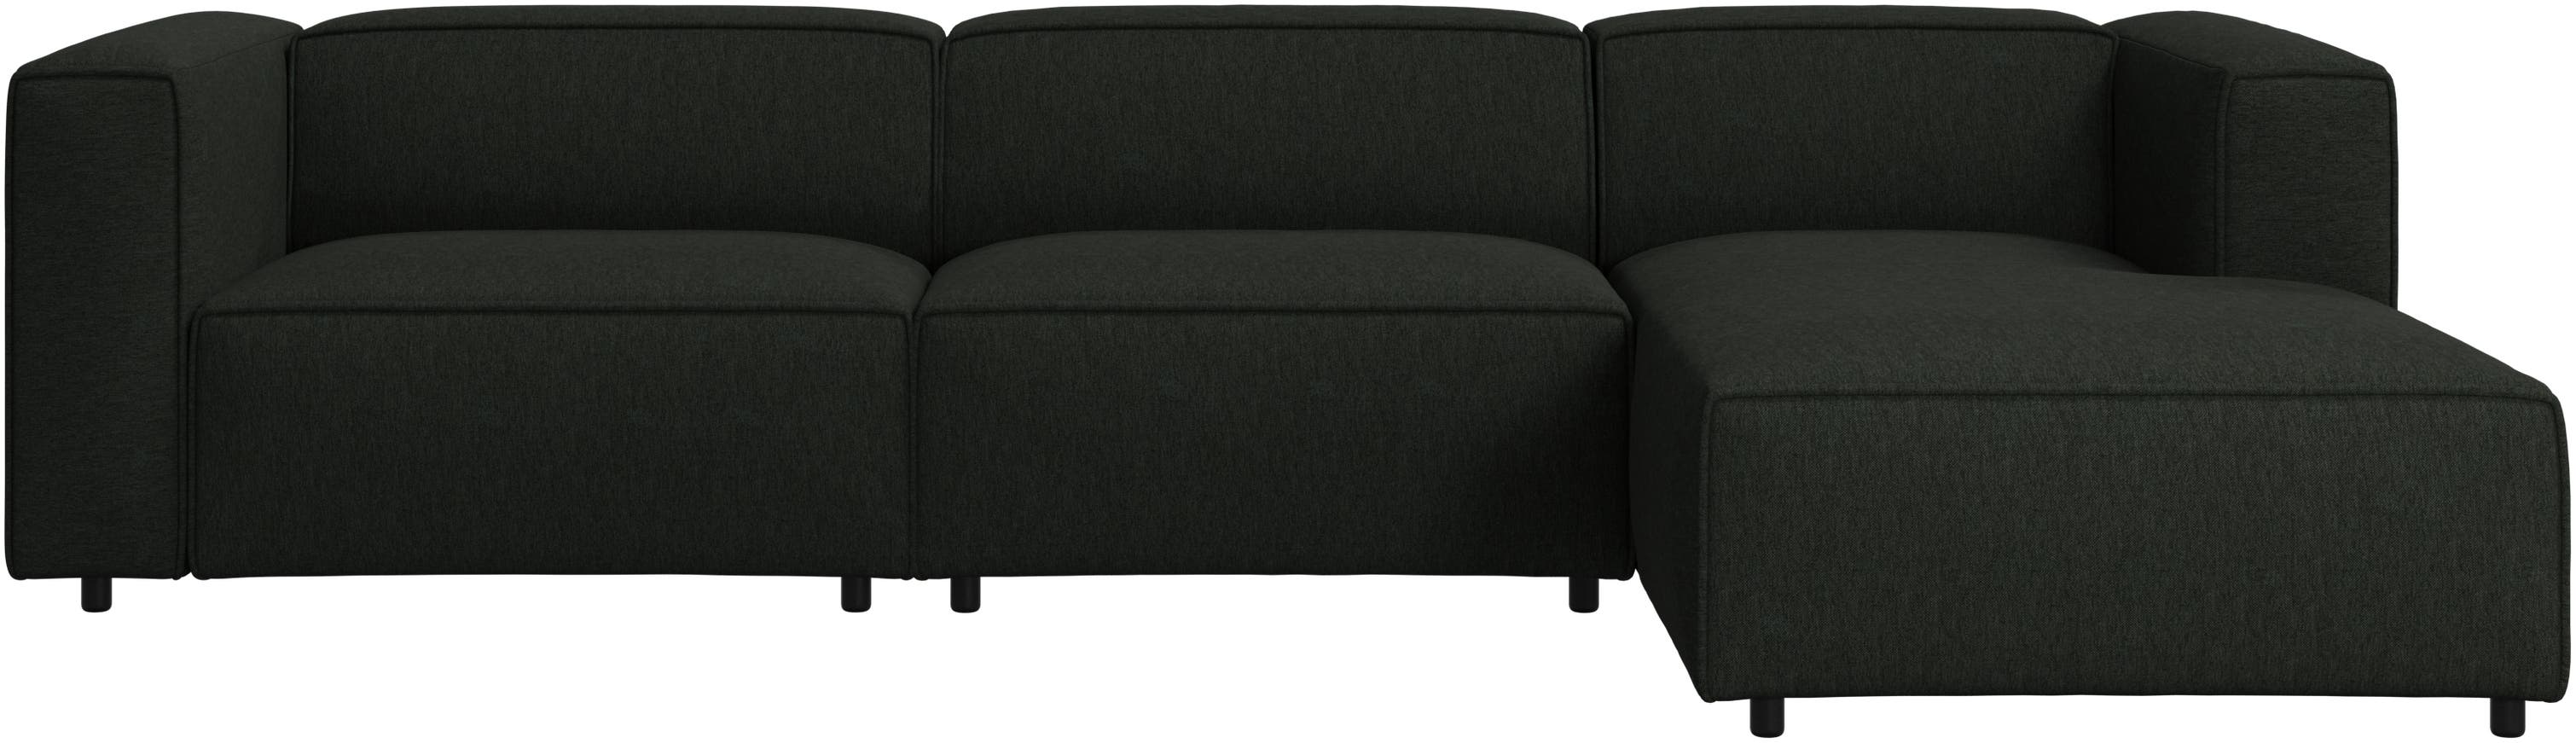 Carmo sofa with resting unit